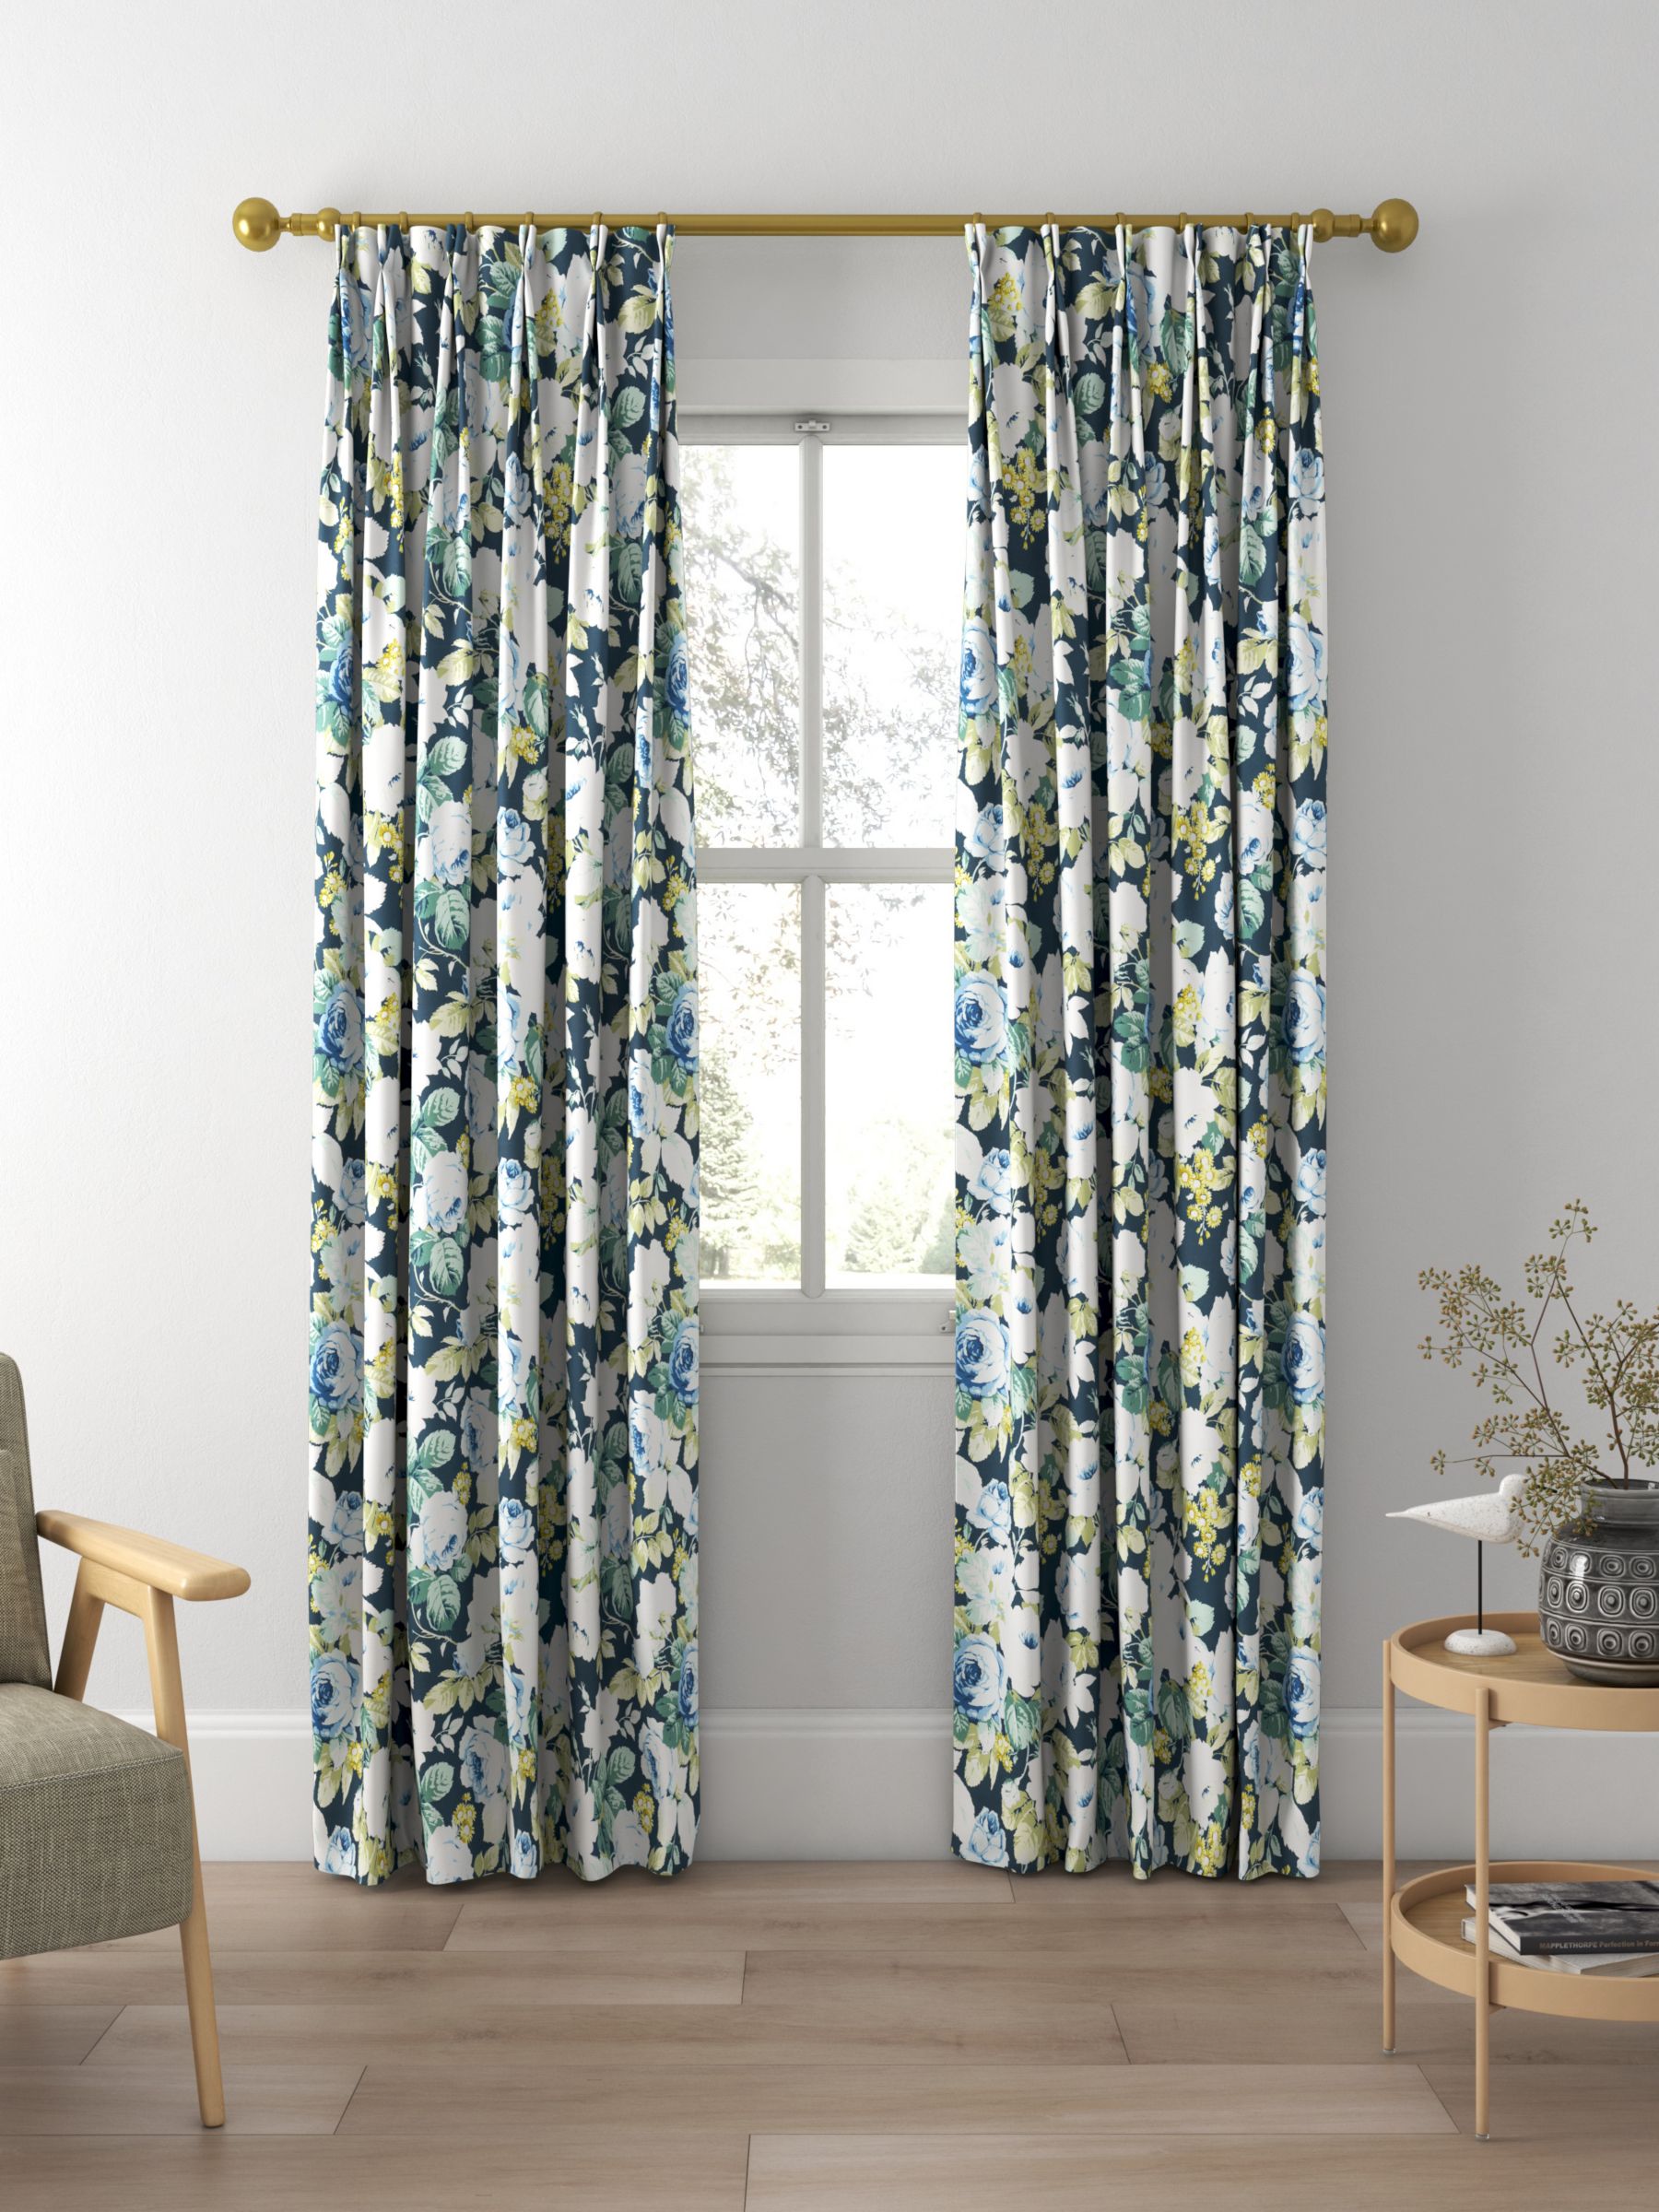 Sanderson Chelsea Made to Measure Curtains, Forest/Indigo